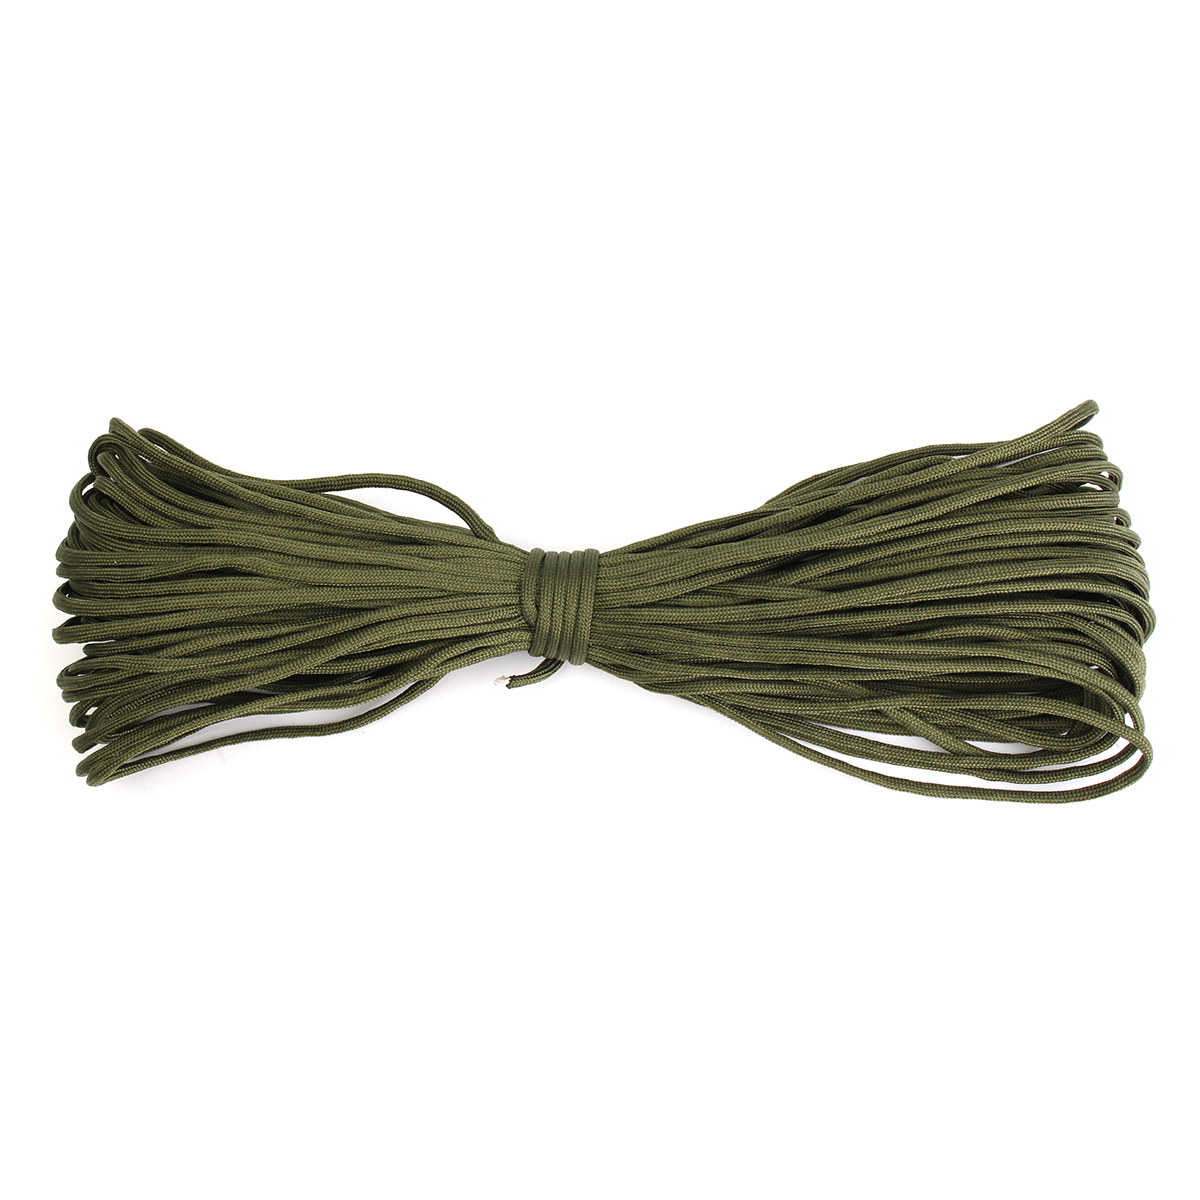 100FT30M-550lb-Paracord-Parachute-Lanyard-7-Strand-Core-Emergency-Army-Green-Rope-1222900-5